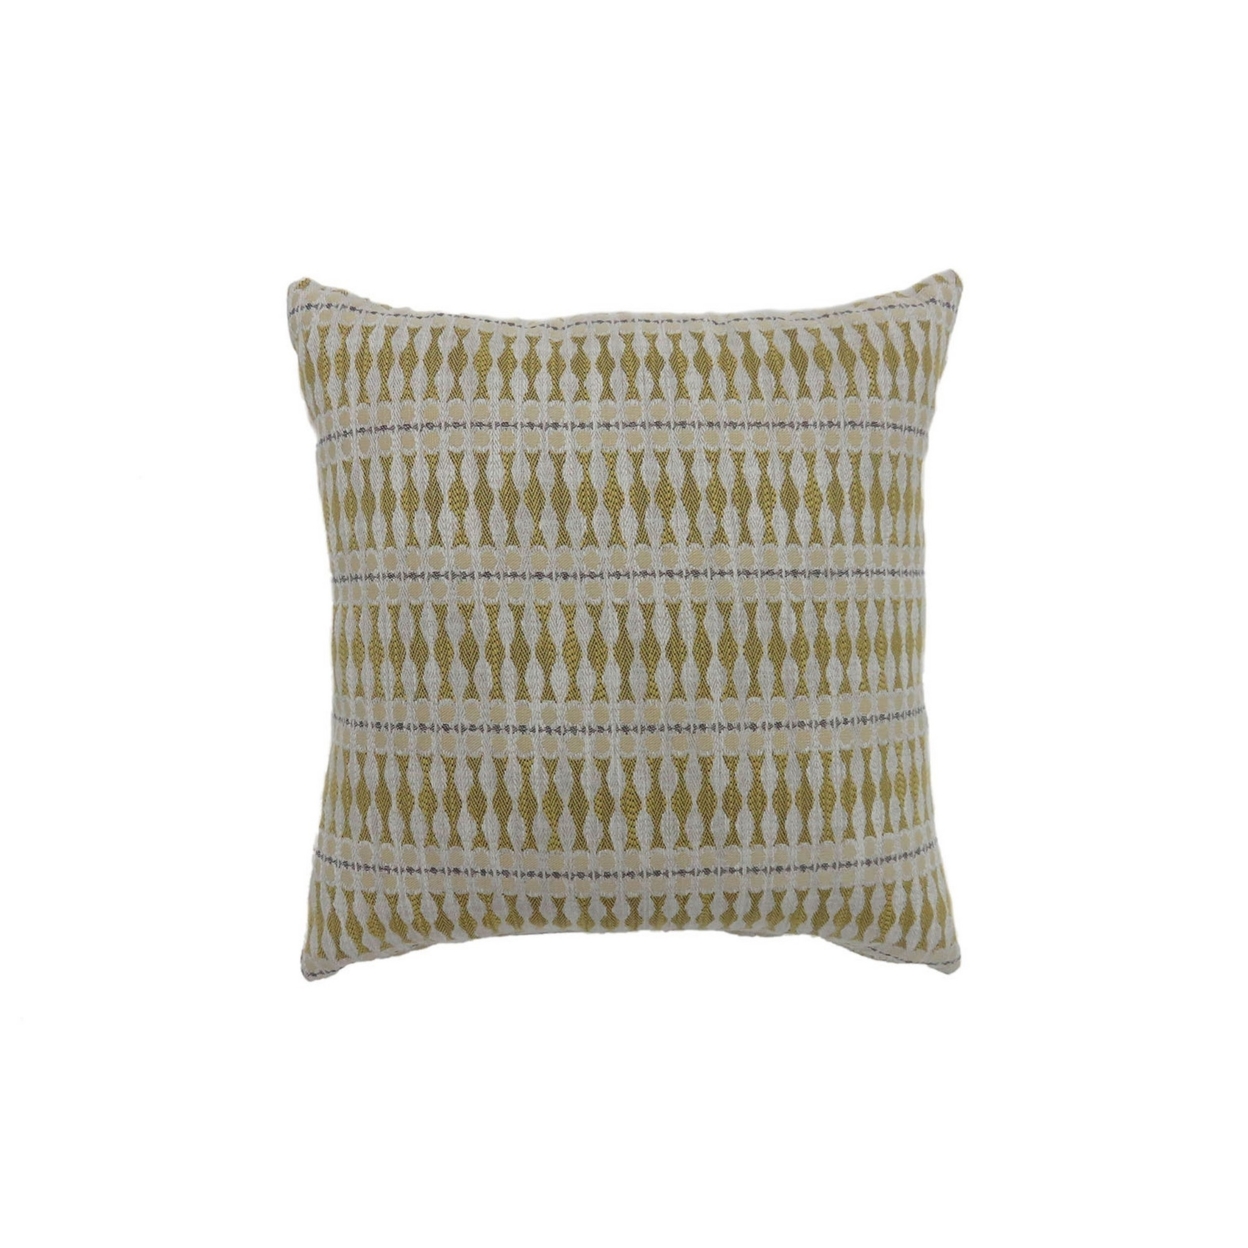 22 Inch Throw Pillow, Set Of 2, Tribal Pattern Polyester Fabric, Gray, Yellow